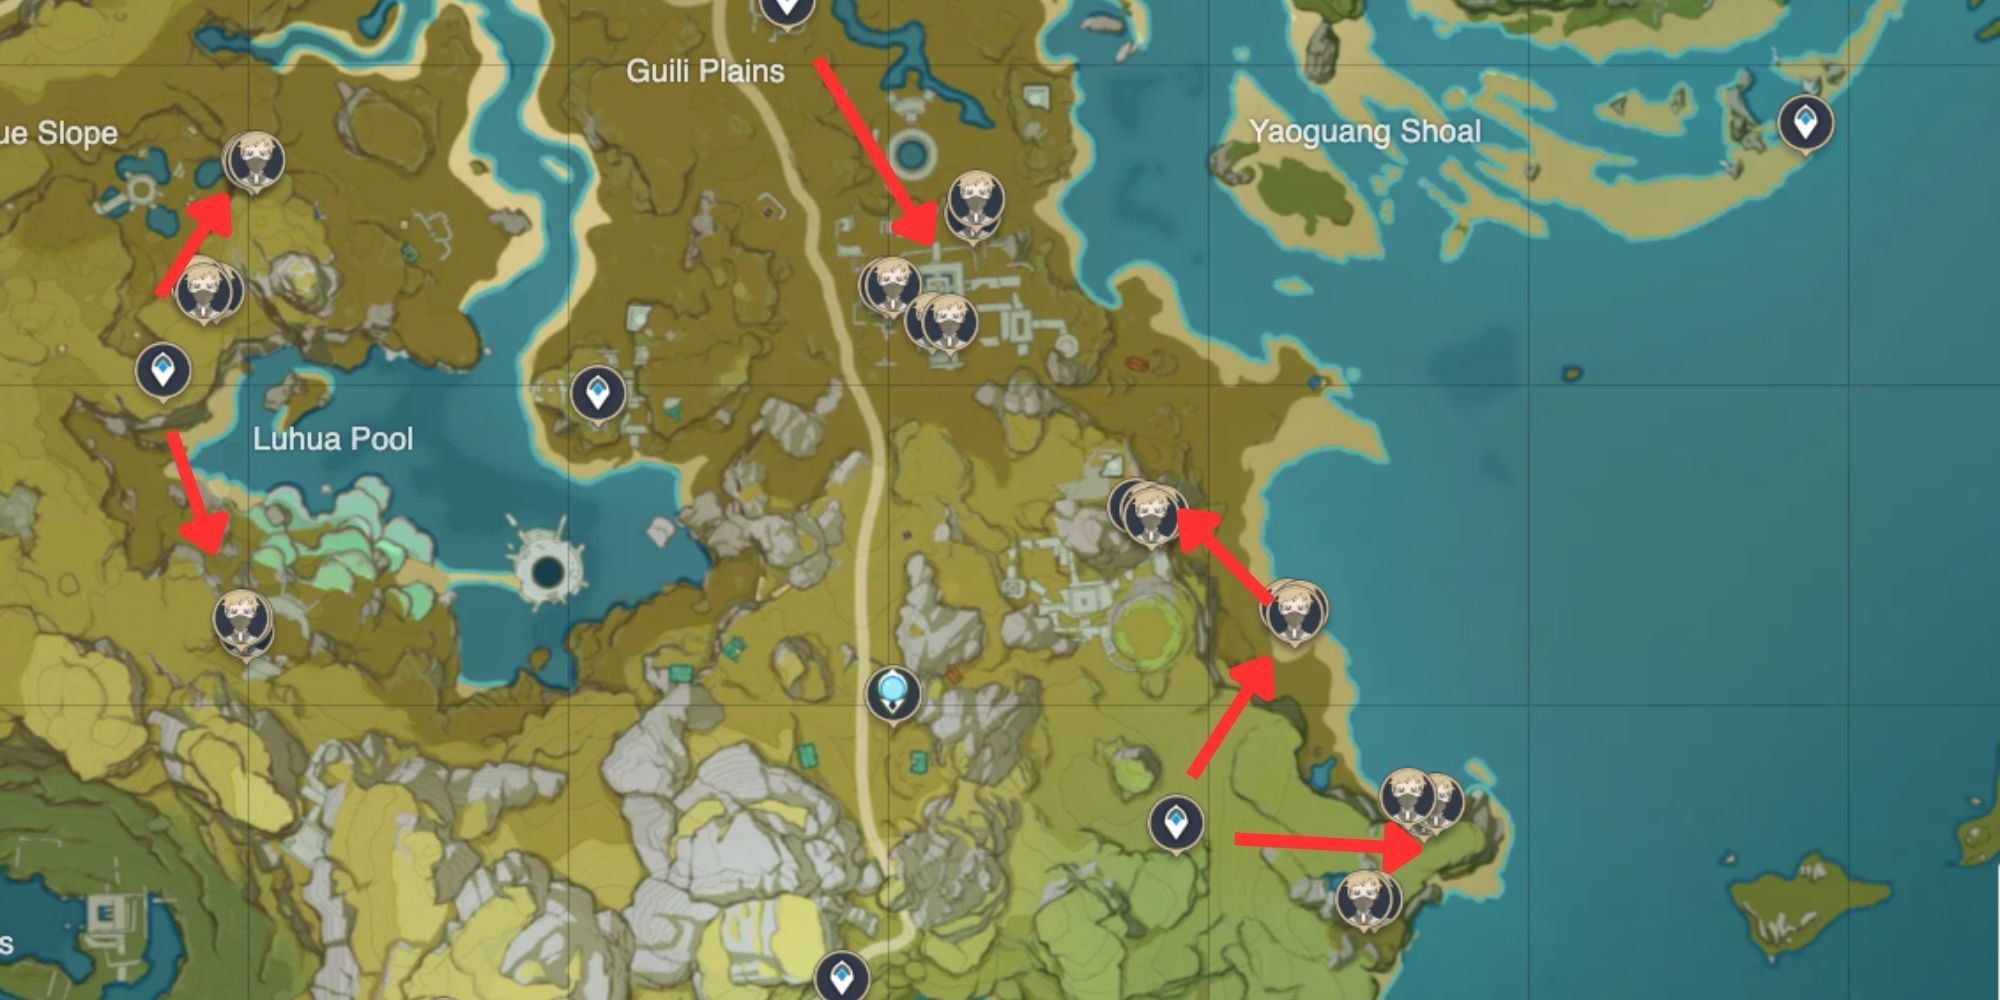 Genshin Impact_ Treasure Hoarder Locations in Guili Plains and Luhua Pool